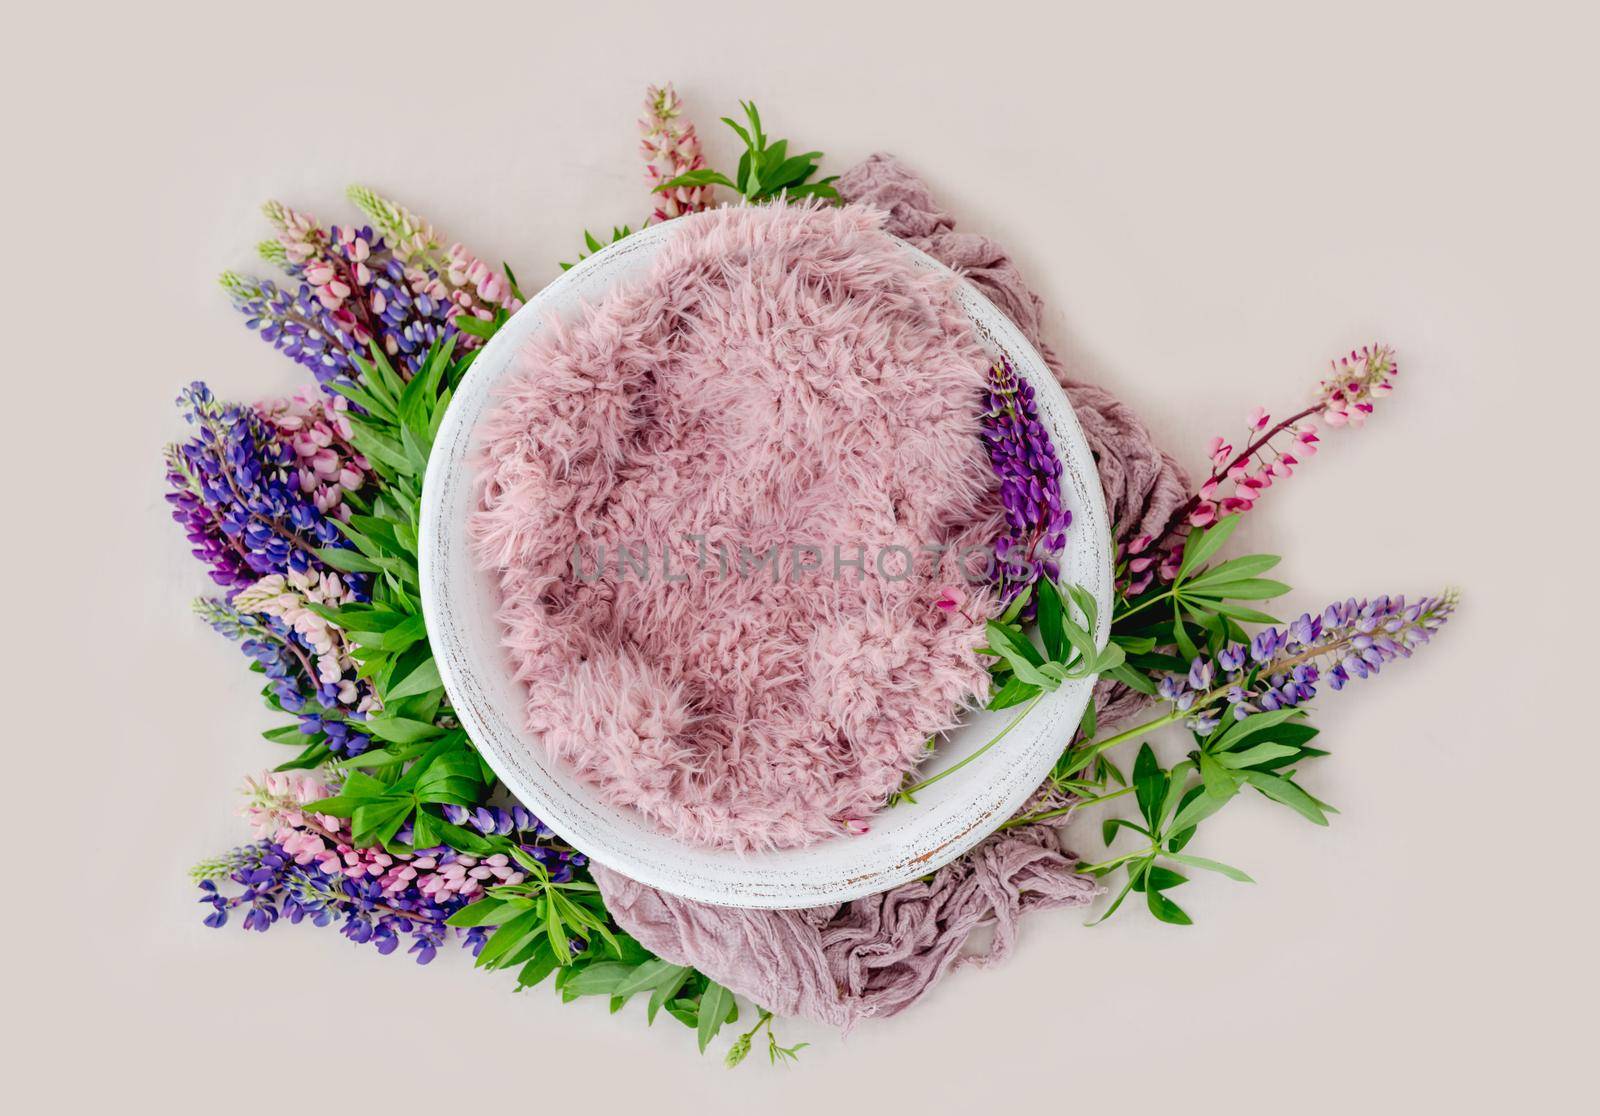 Beautiful basin furniture for newborn studio photoshoot with pink fur and purple flowers decoration. Tiny designed place for infant photo